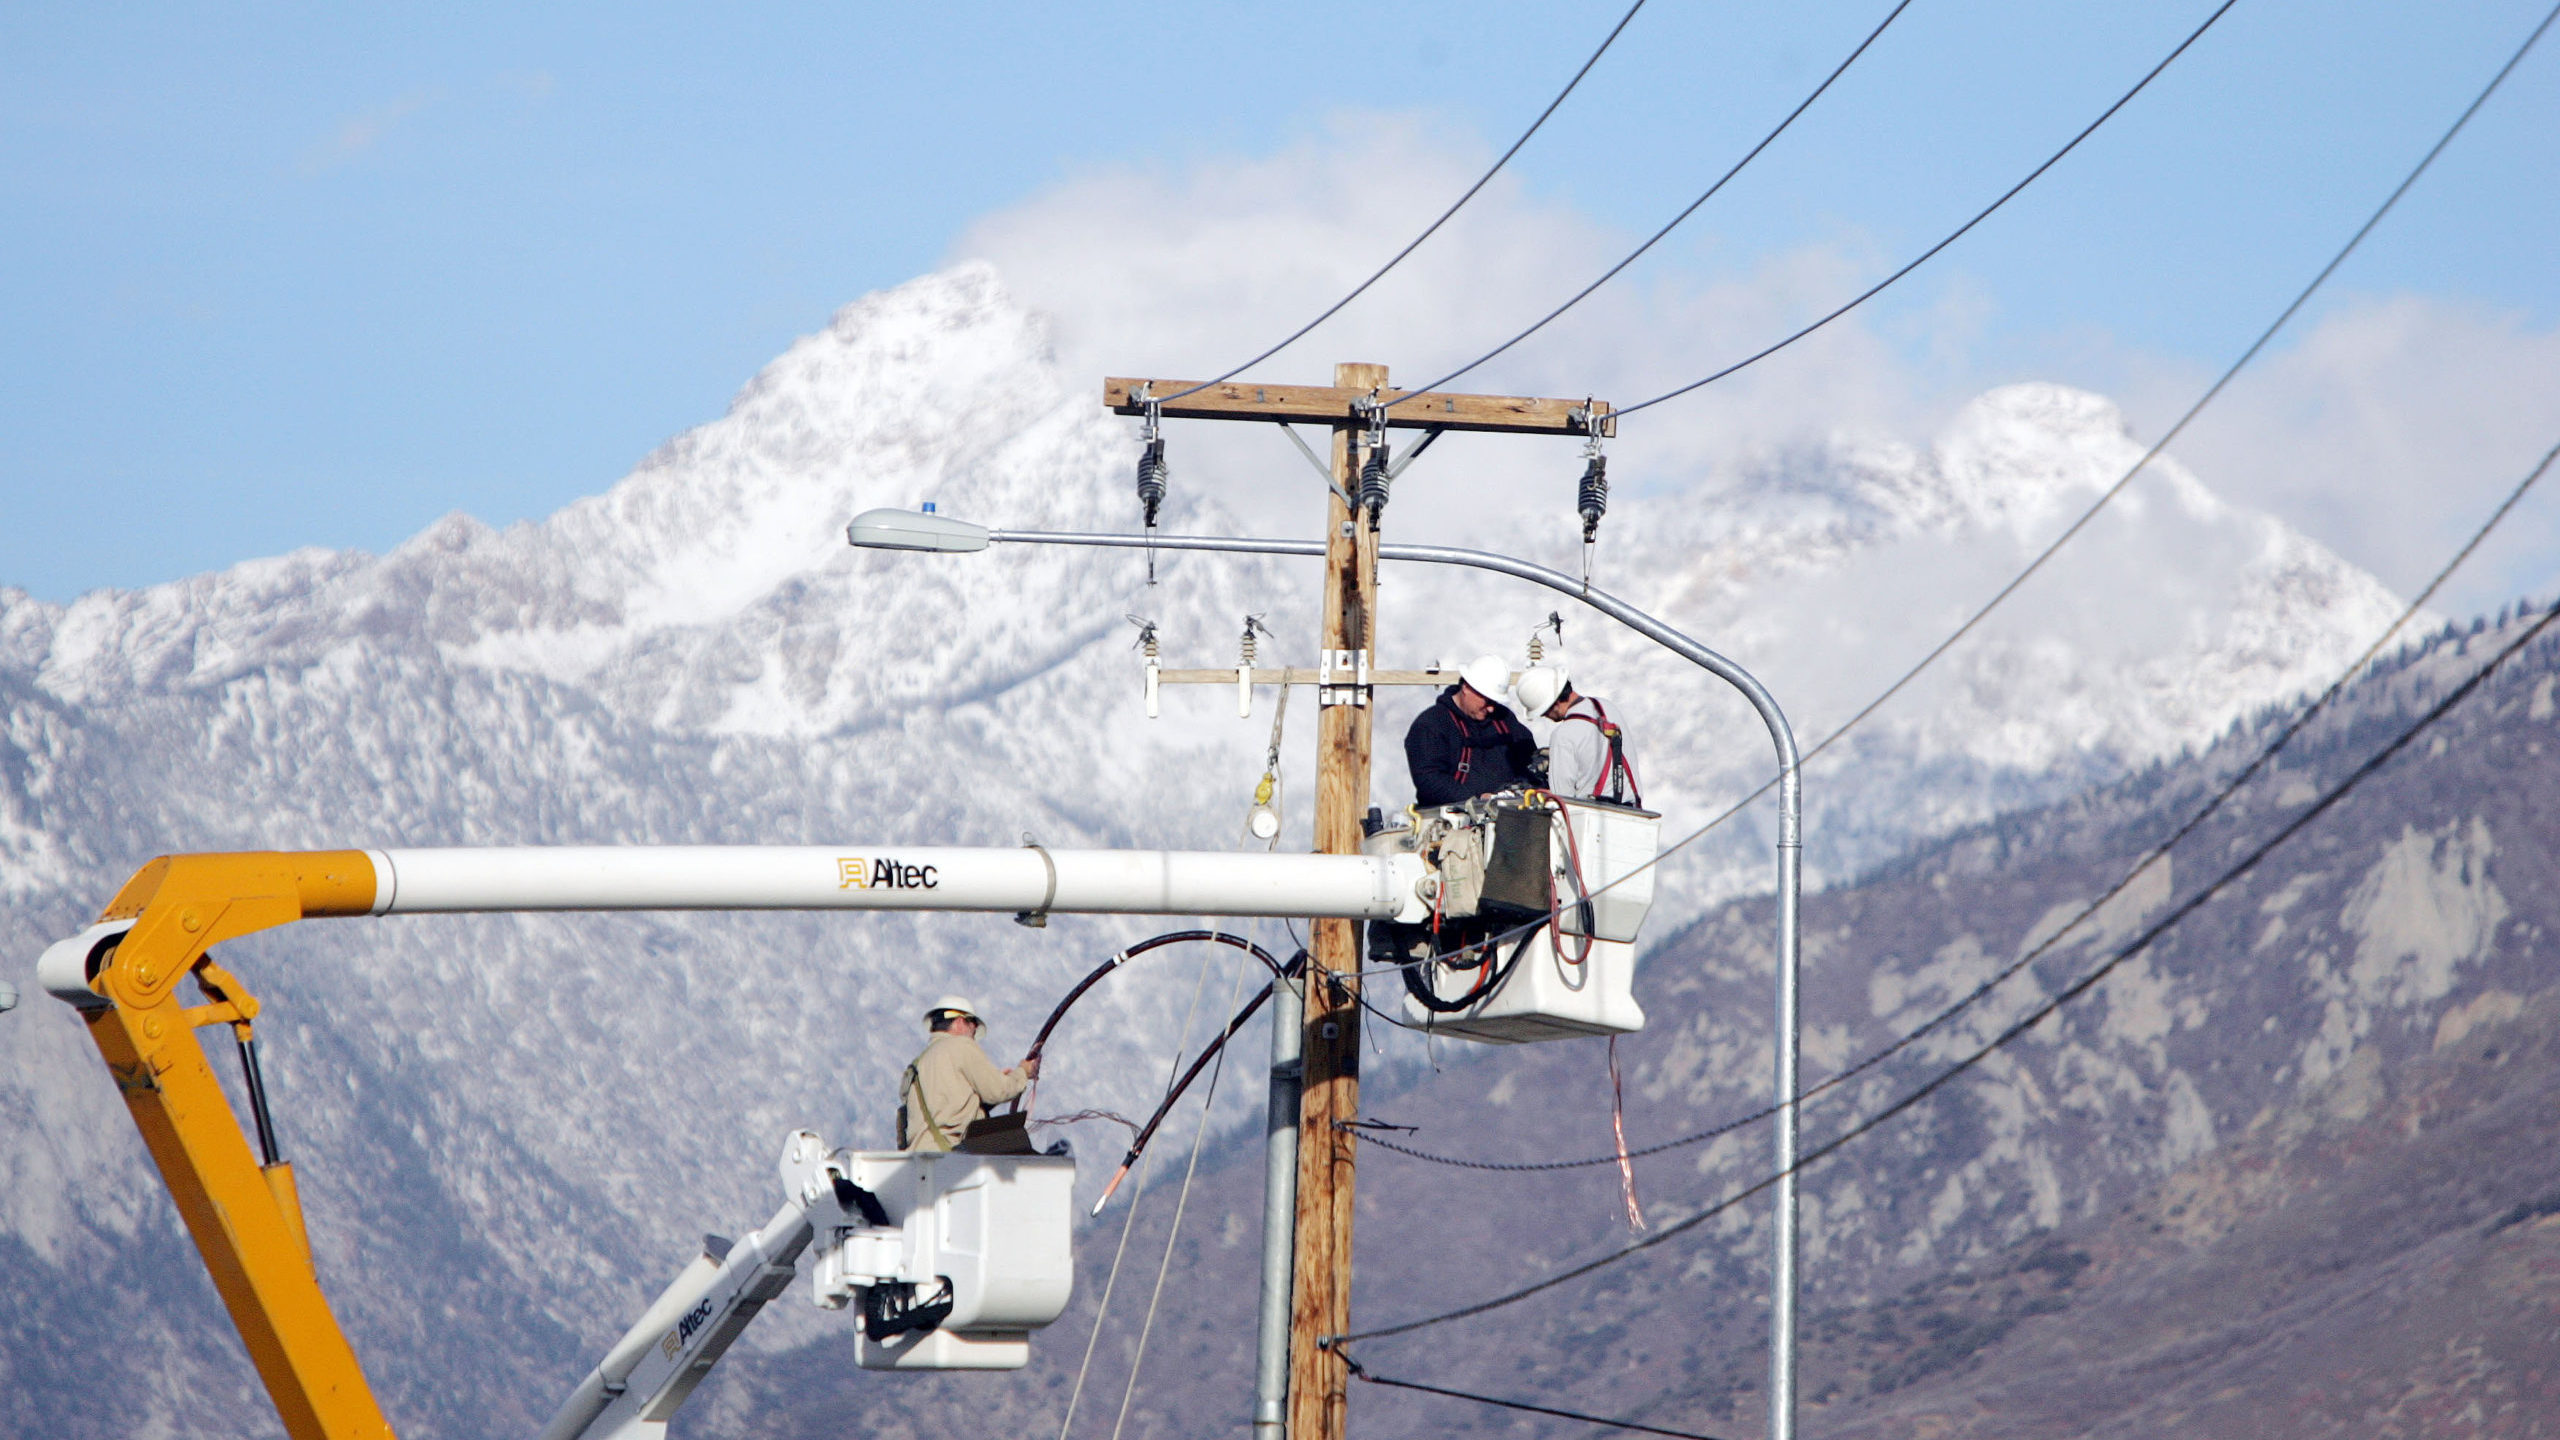 A man works on a power pole, RMP just reported a power outage in salt lake city...